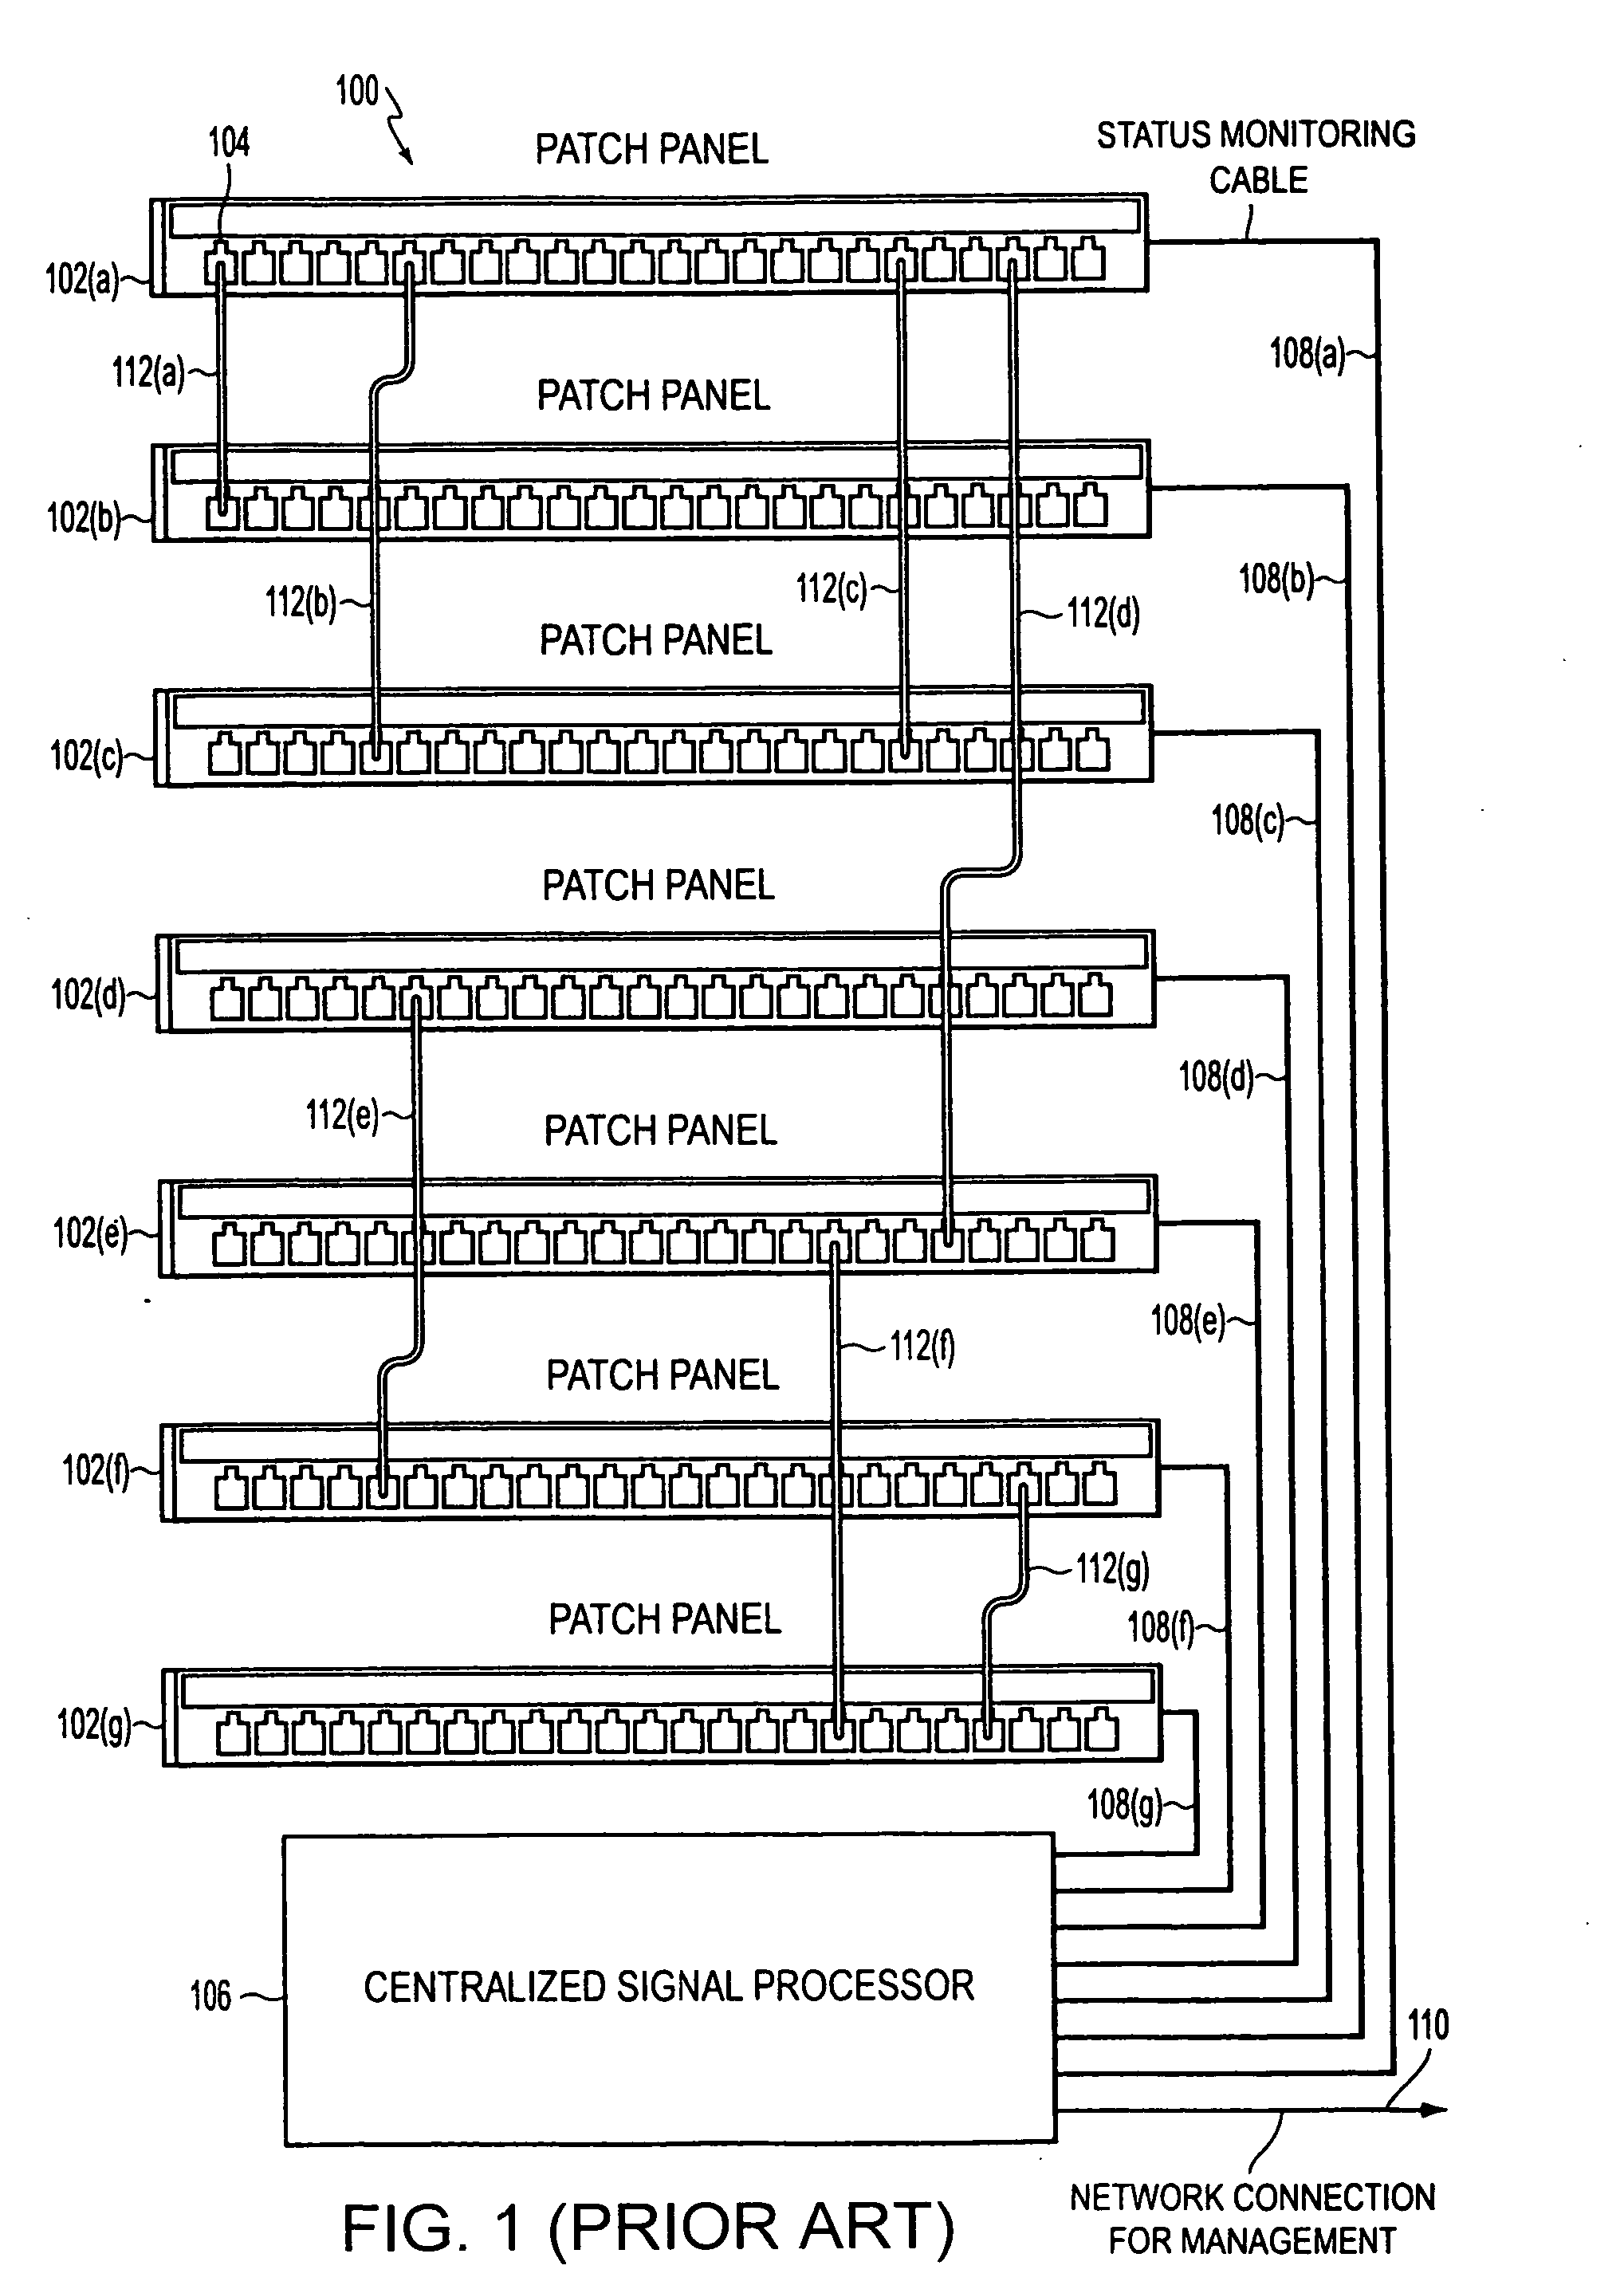 Method and apparatus for patch panel patch cord documentation and revision